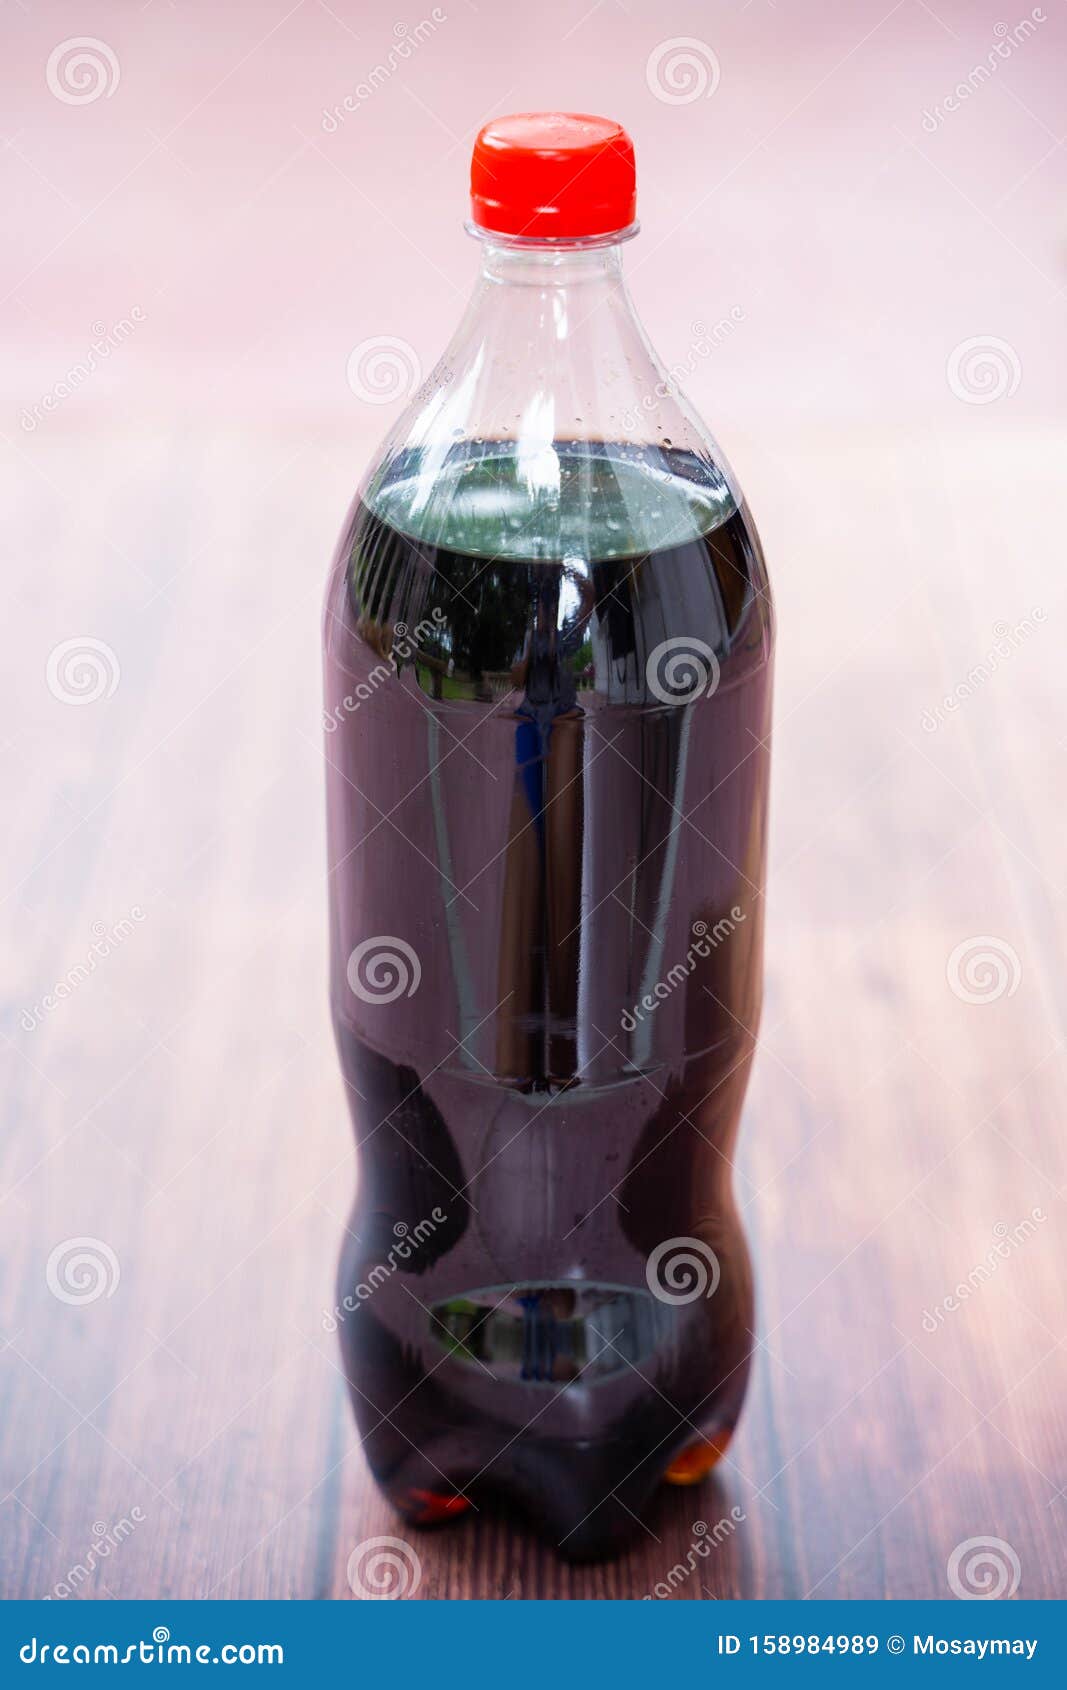 Download 1 253 Coca Cola Plastic Bottle Photos Free Royalty Free Stock Photos From Dreamstime Yellowimages Mockups